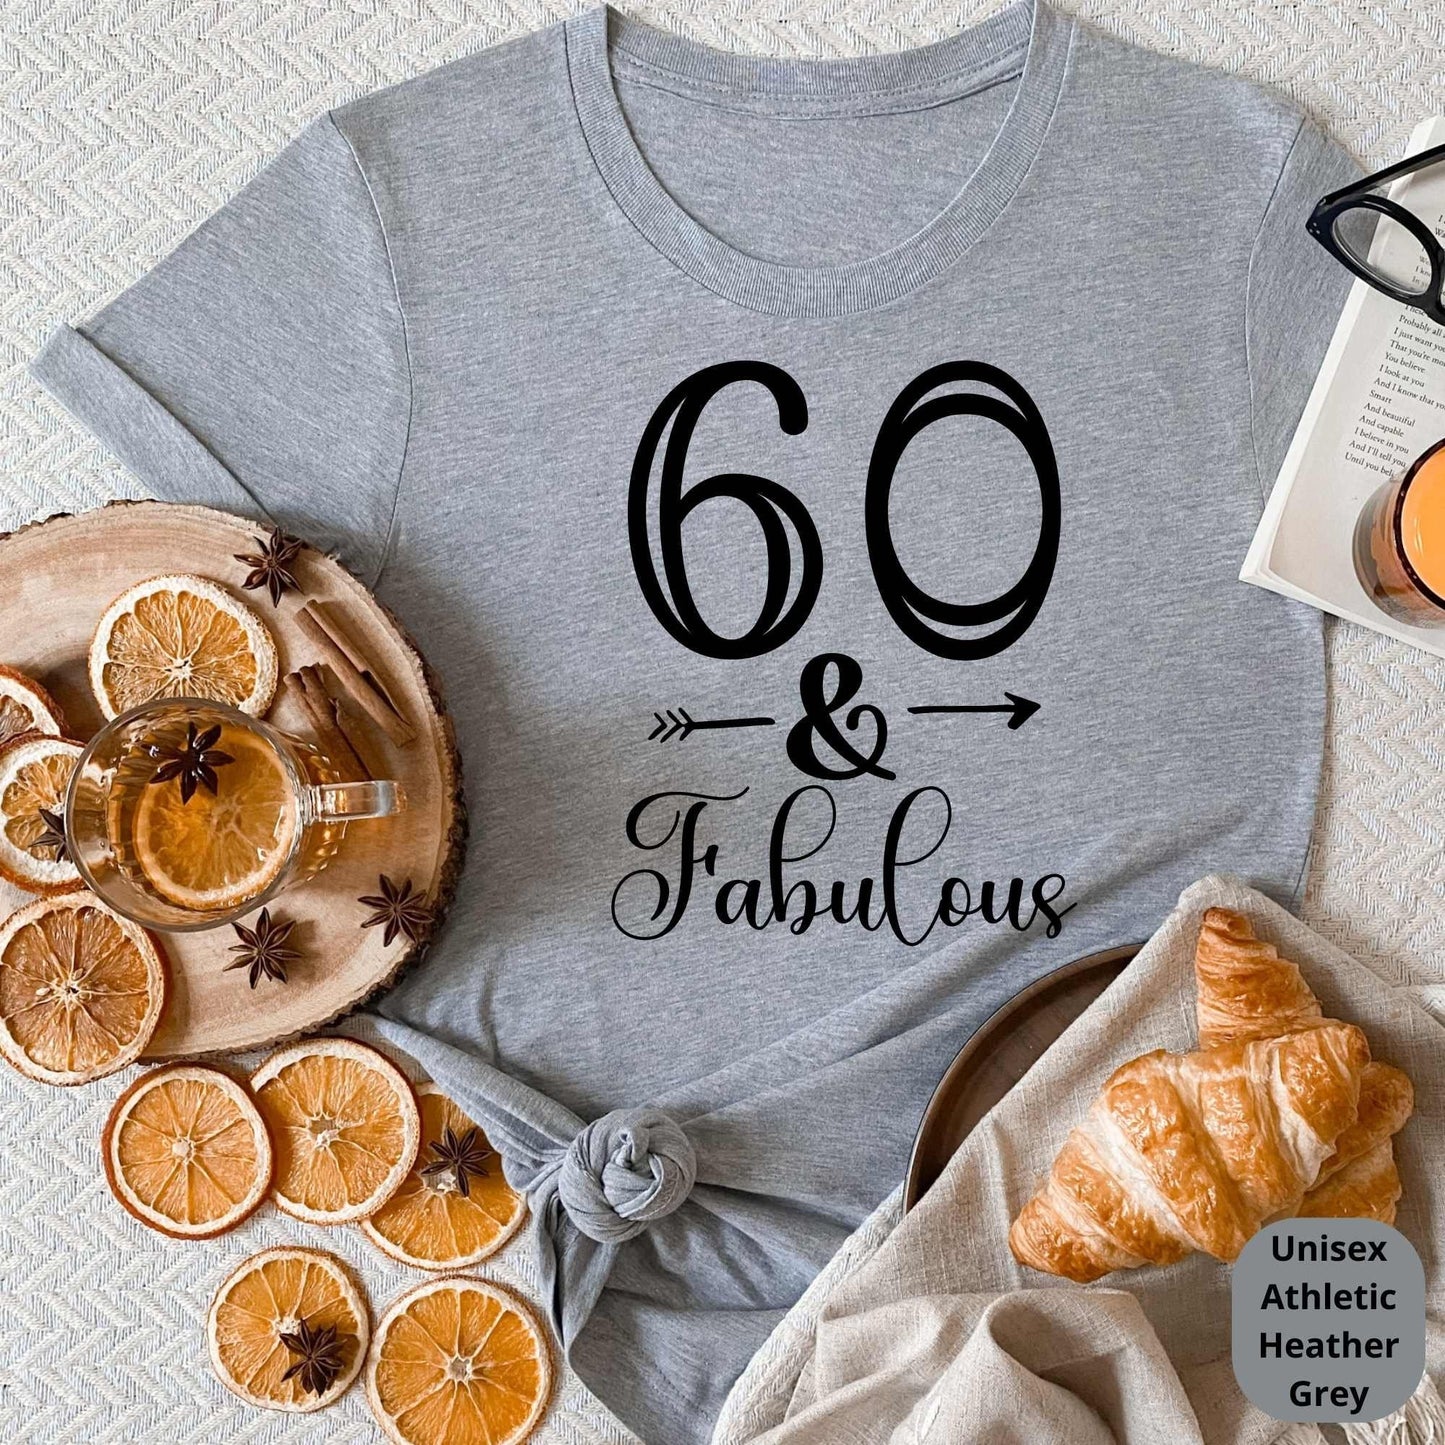 60th Birthday Shirt, 60th Birthday Gifts, Fabulous 60 Tee, Great Gift for Grandma, Mom, Aunties, Cousins & Loved Ones Bday Party Celebration